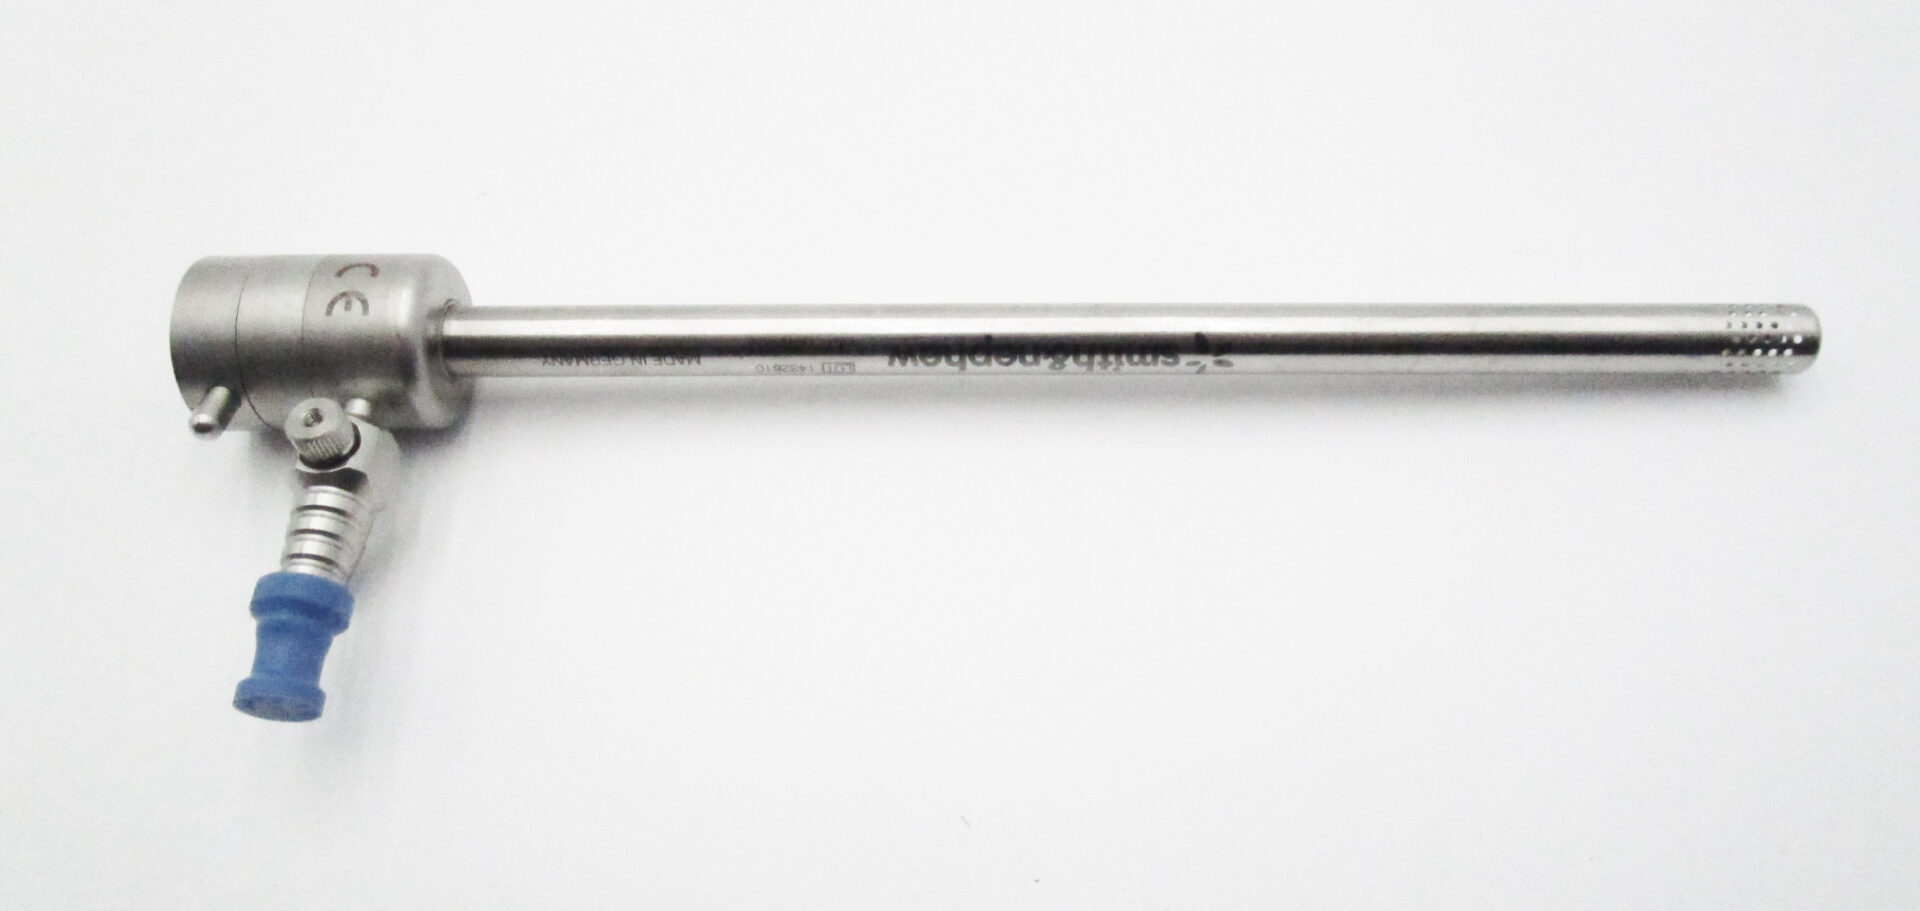 A metal rod with a long handle on top of it.